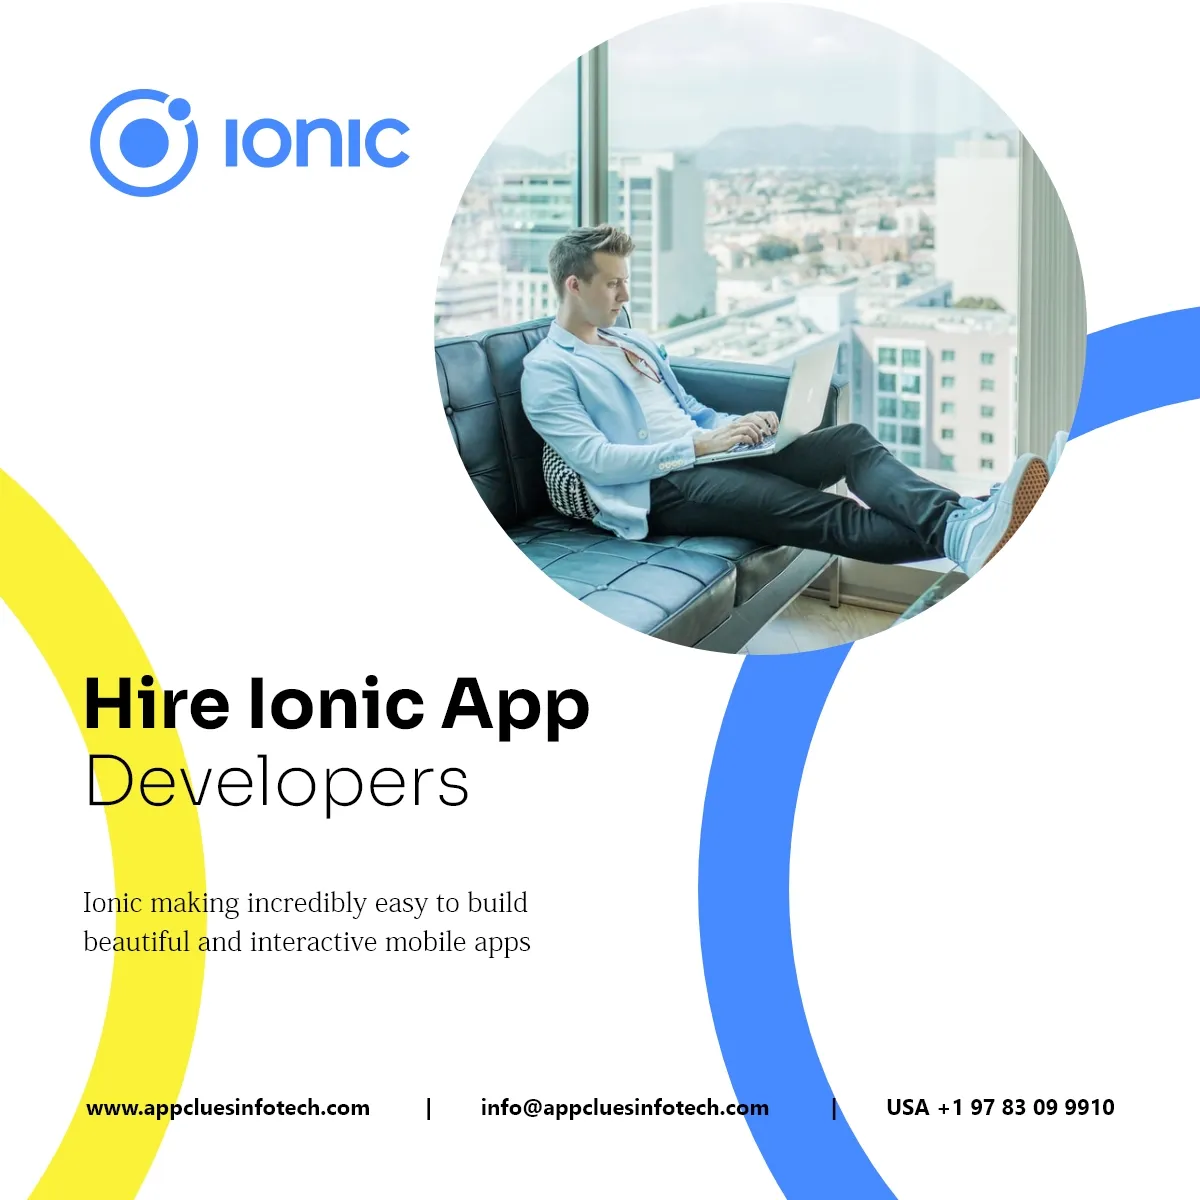 Hire Ionic Mobile App Developers in USA